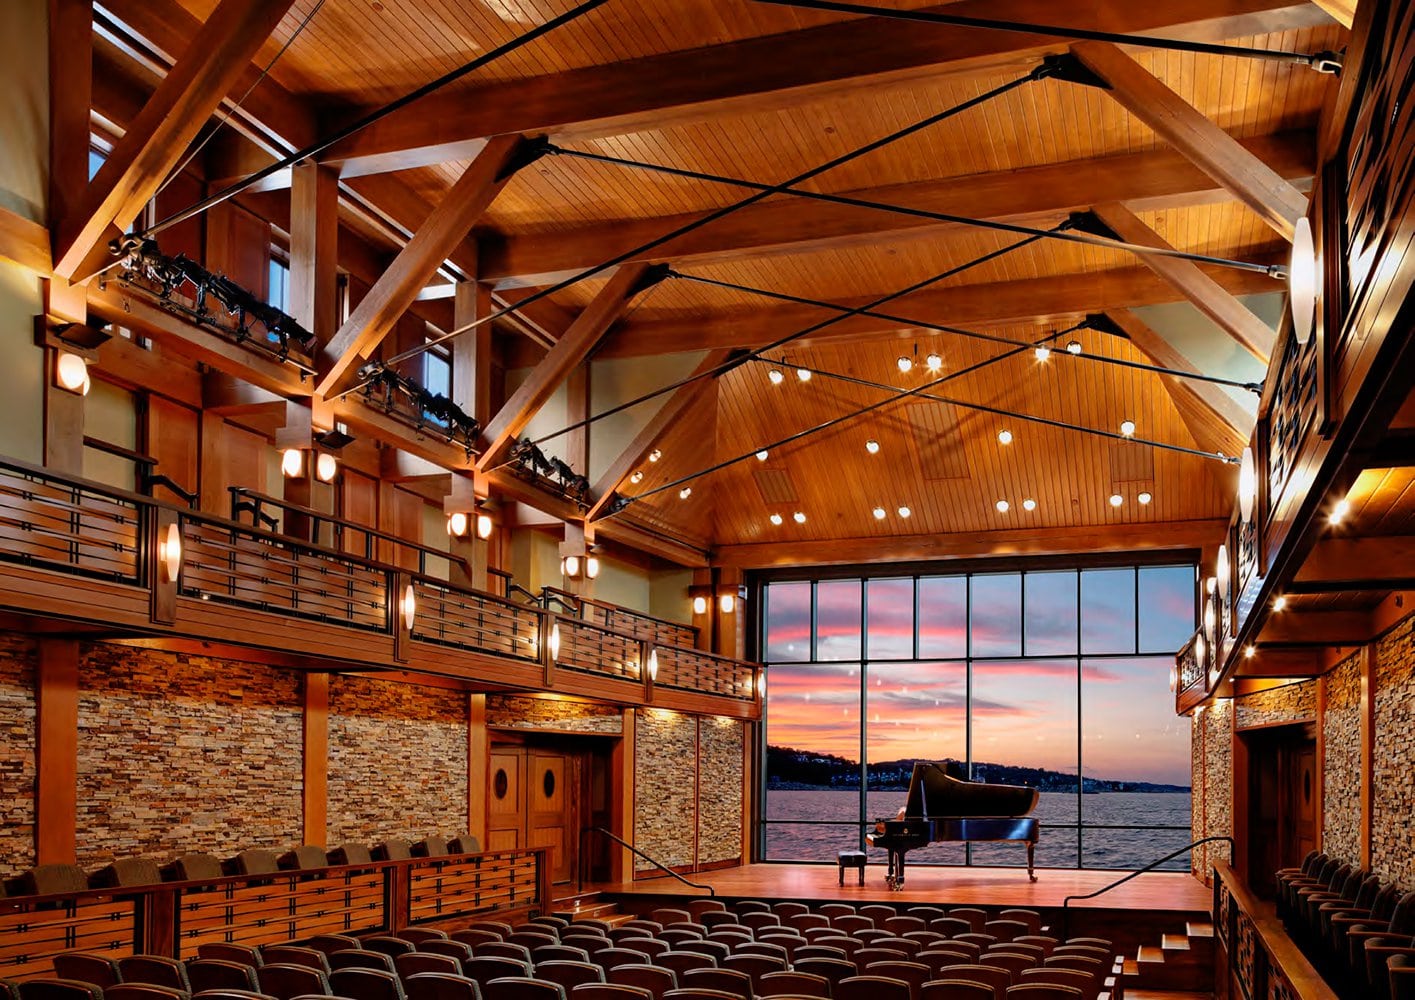 Norstone Architectural Grade Ochre Blend Standard Series Rock Panels at Rockport Concert Hall in Rockport, MA